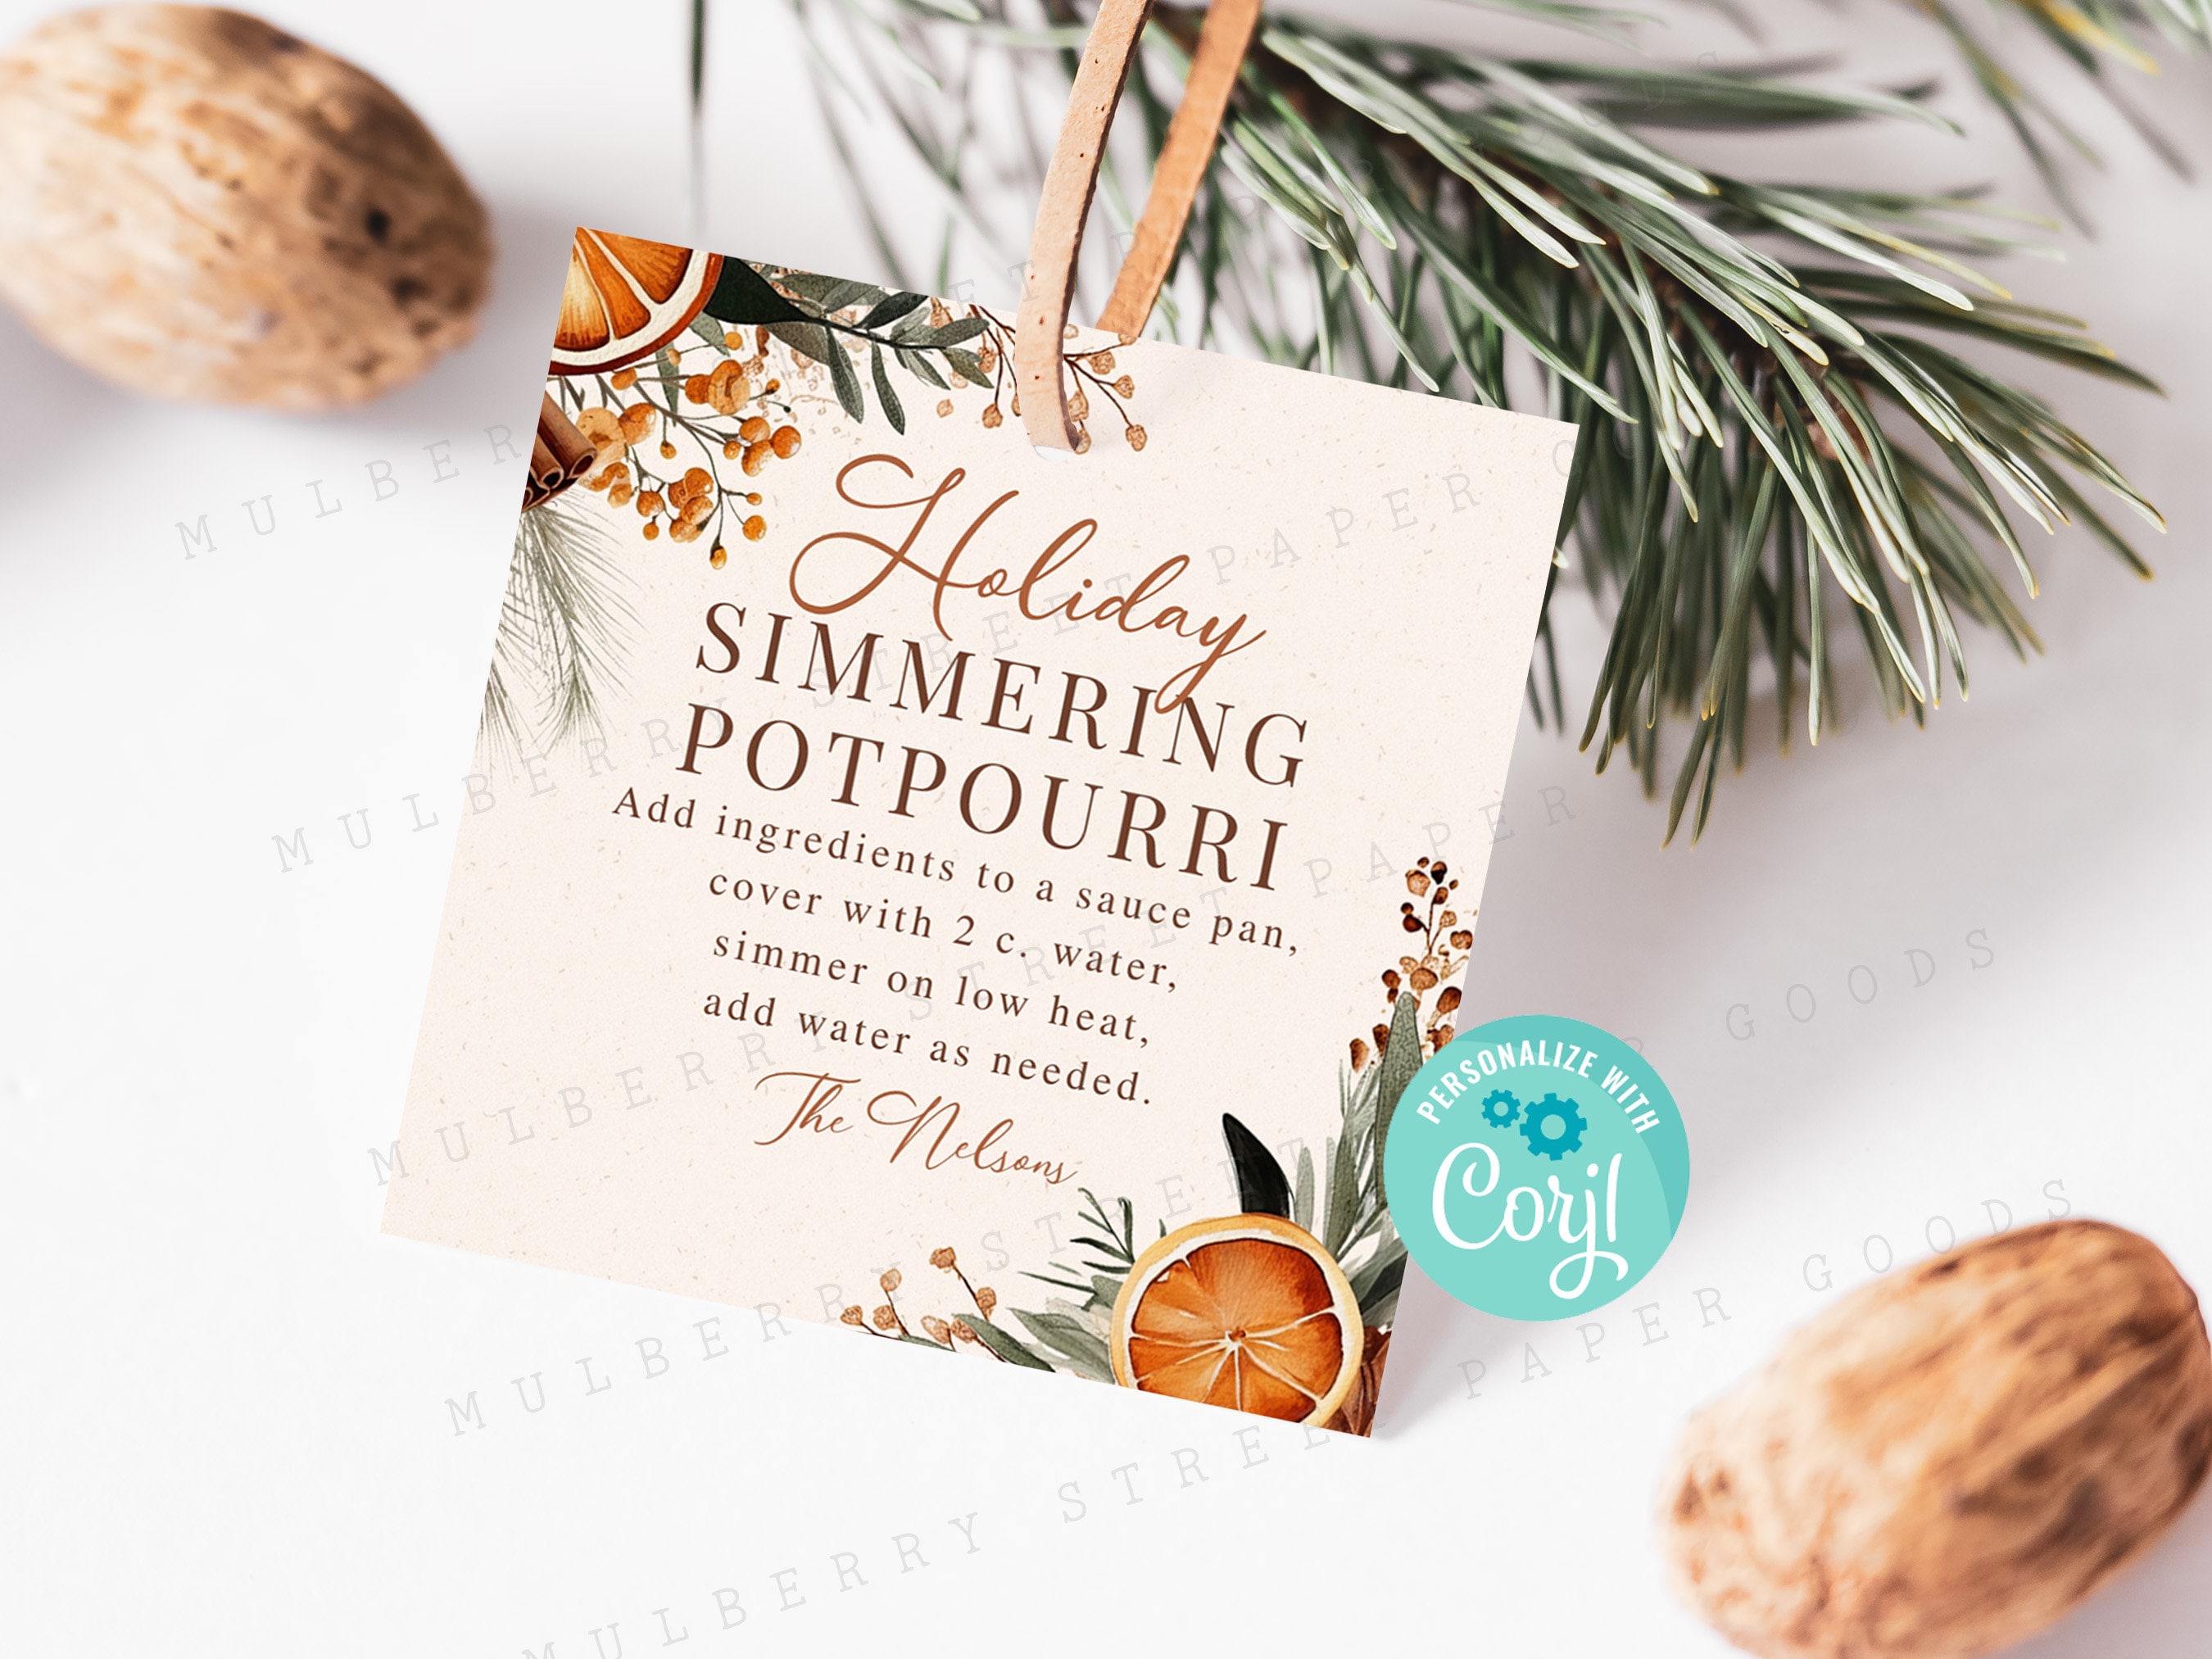 Crafters Cup Christmas Stovetop Potpourri Simmer Instruction Cards | 30 Pack | 2.5 x 2.5 Inches Square Card | Potpourri | White Christmas Design